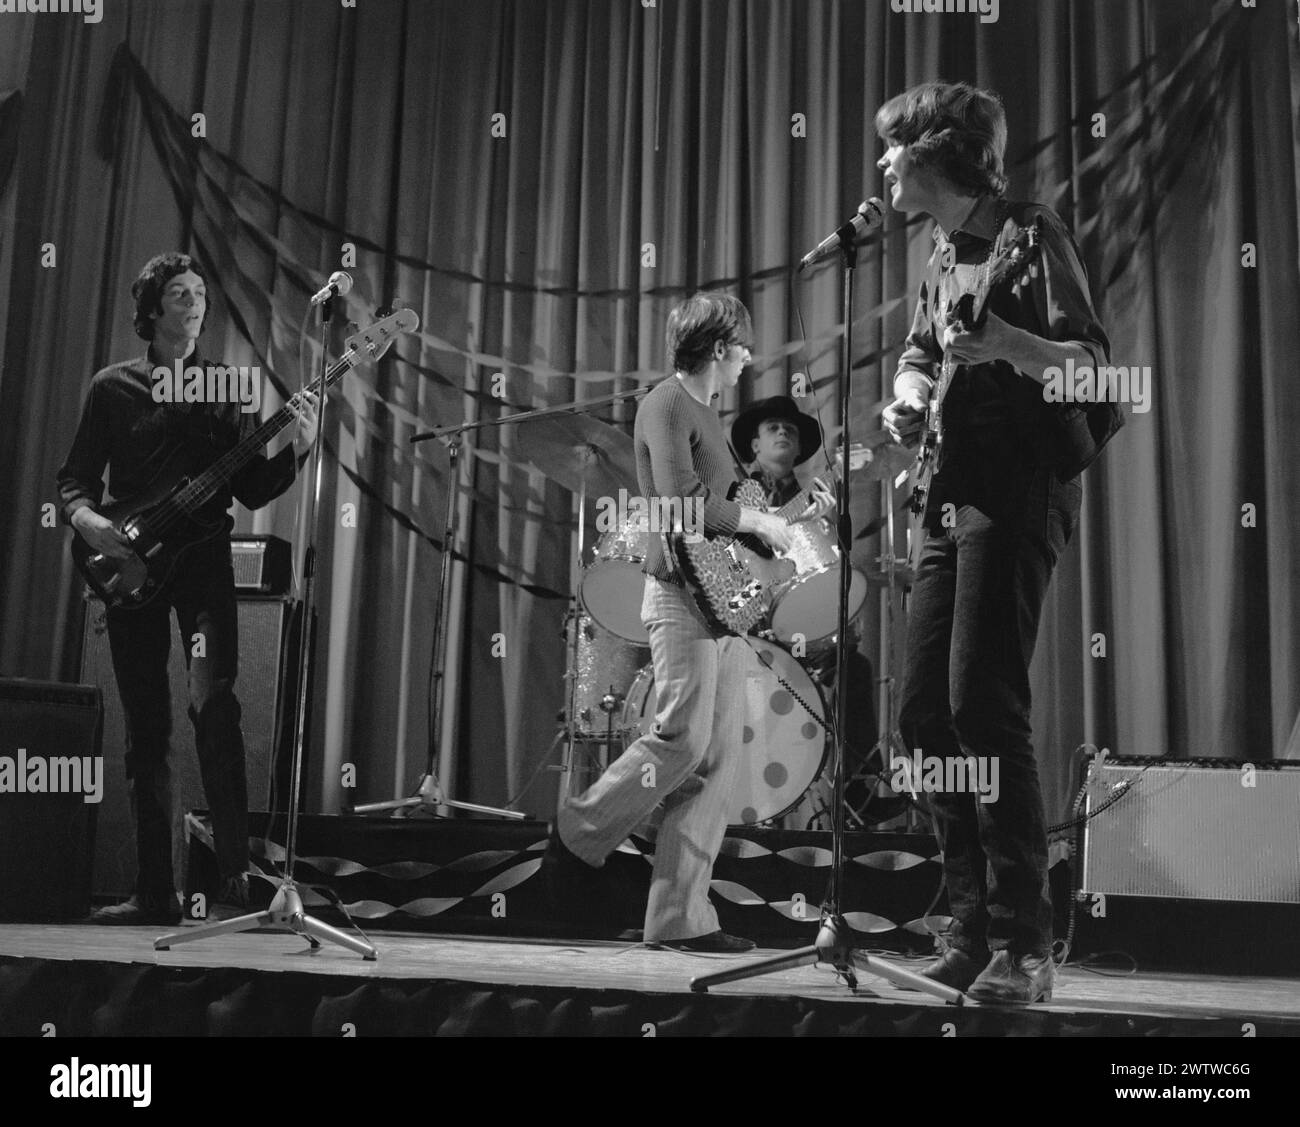 Four piece, all male rock 'n' roll band performing on stage in the 60's. Stock Photo